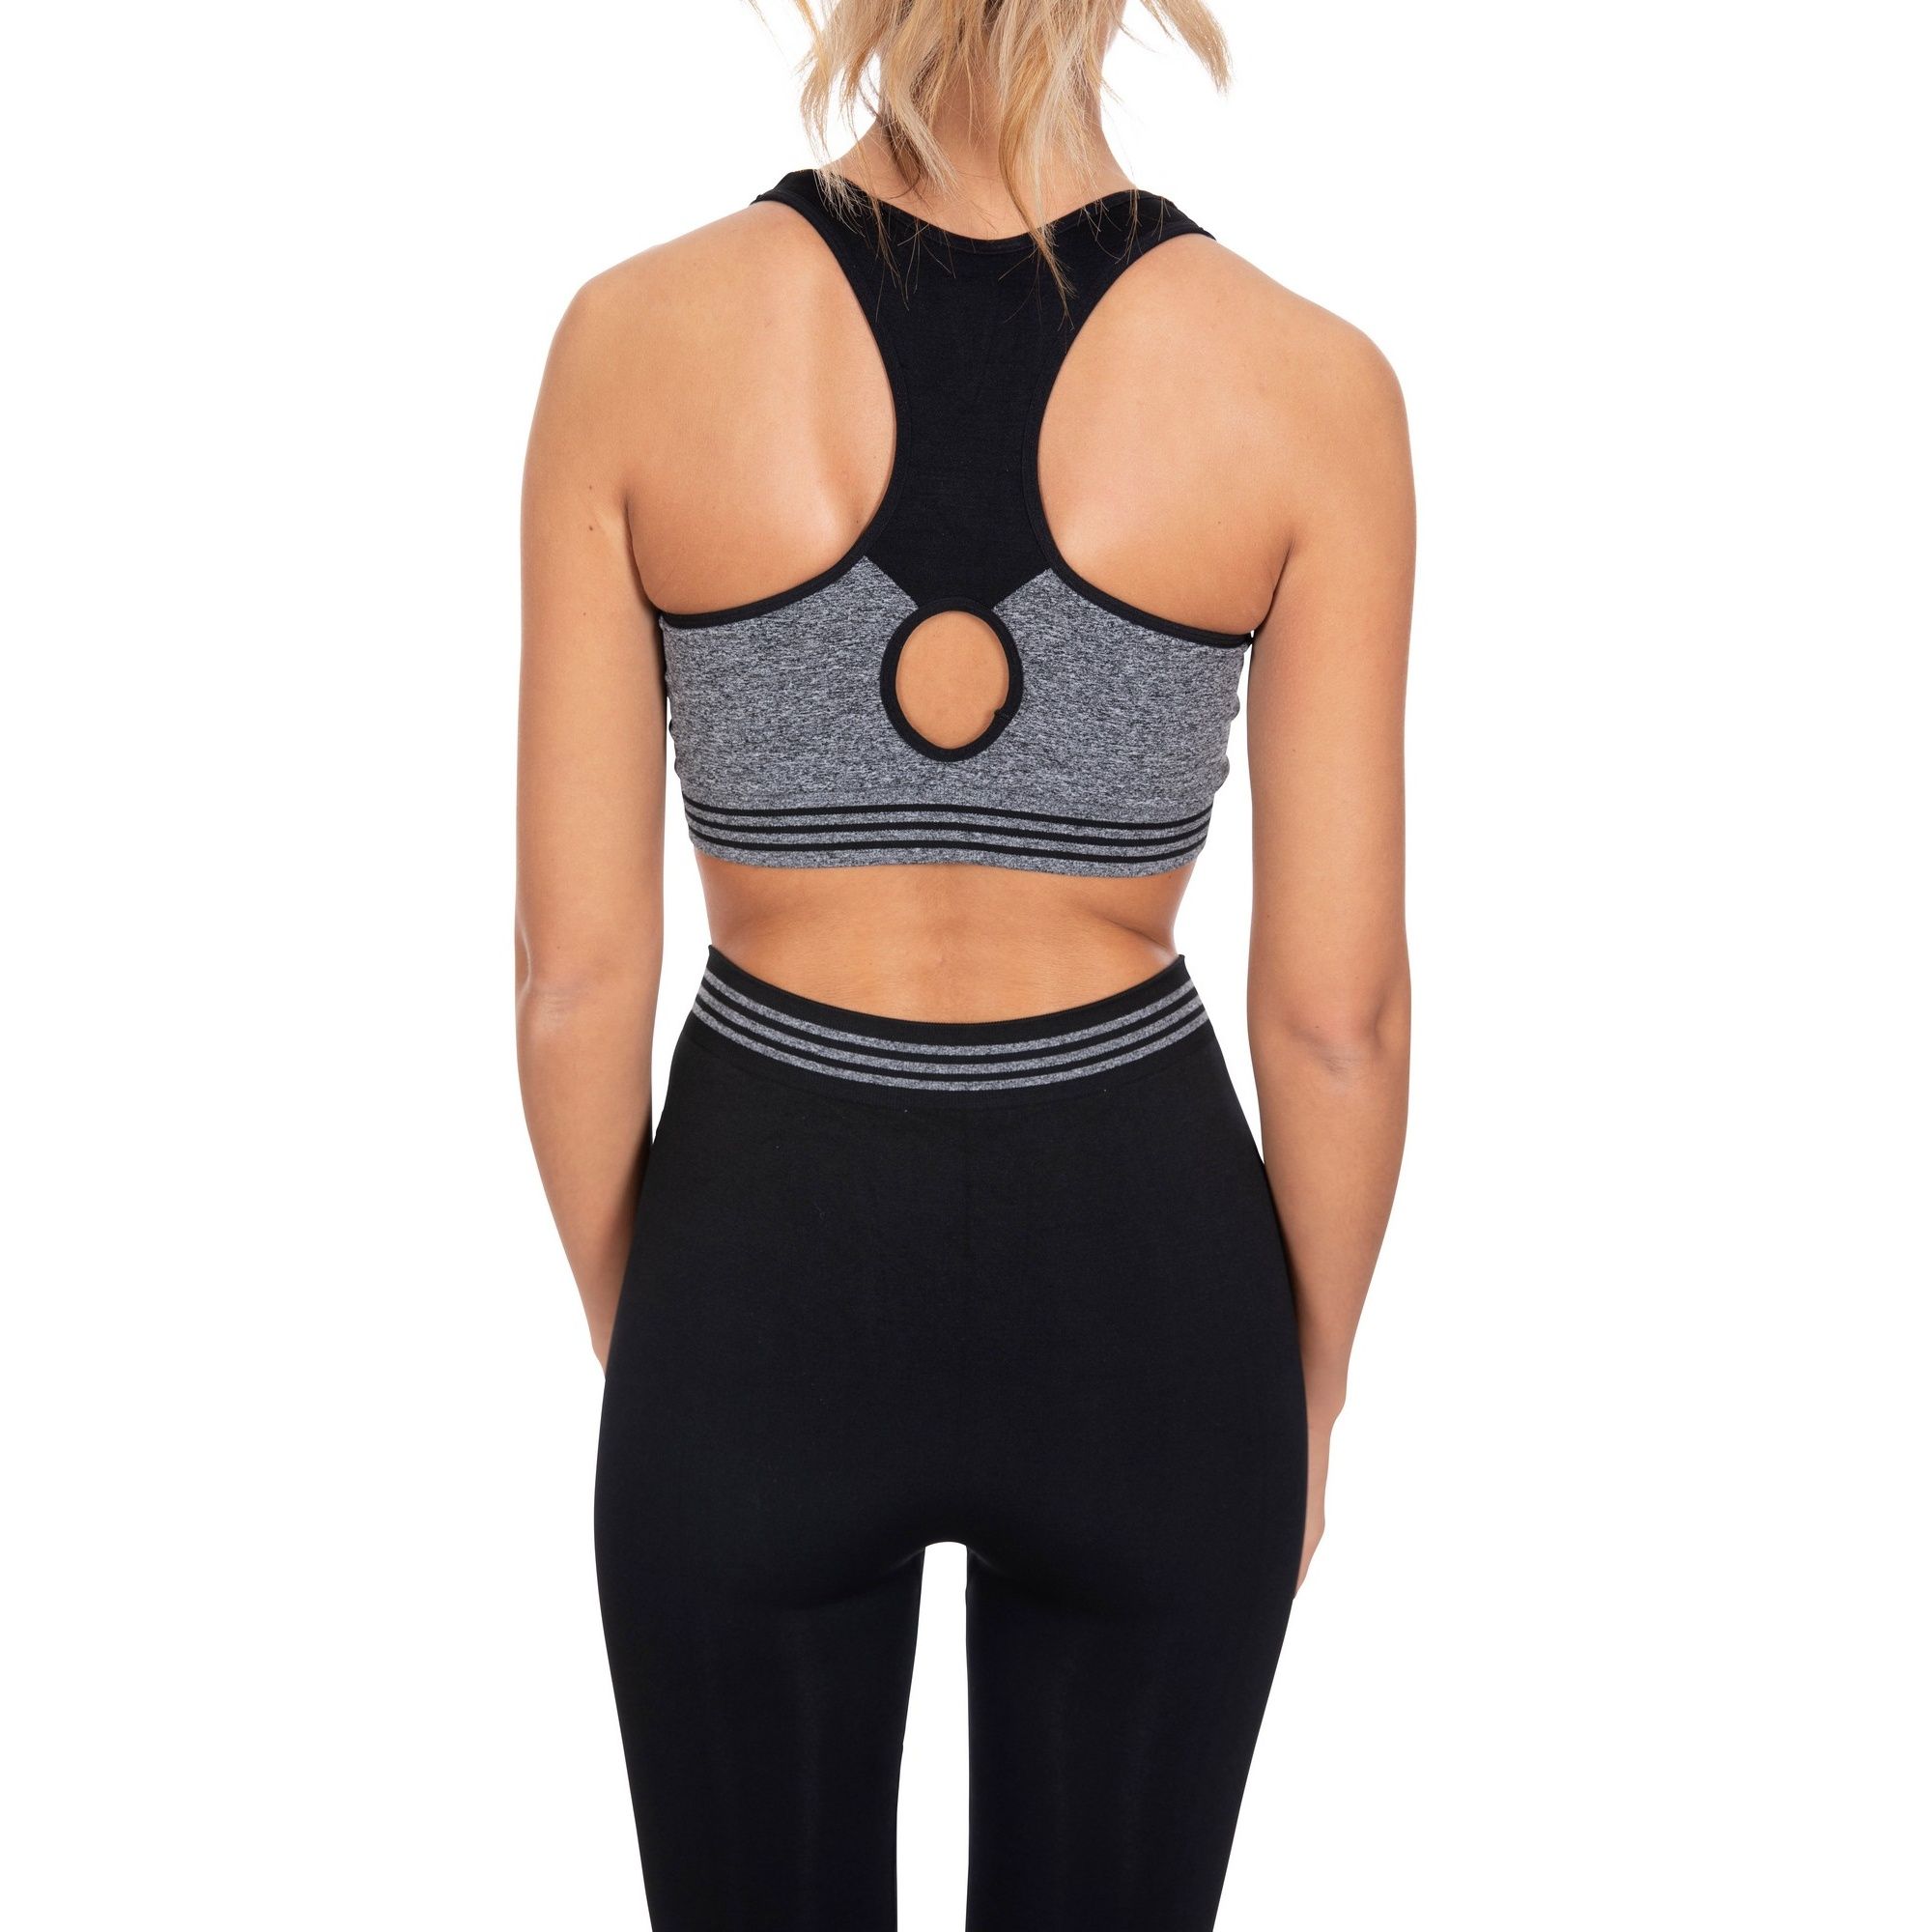 56% Polyamide, 36% Polyester, 8% Elastane. Seamless bra top. Contrast panels. Removable bust pads. Cut out detail at back. Wicking. Trespass Womens Chest Sizing (approx): XS/8 - 32in/81cm, S/10 - 34in/86cm, M/12 - 36in/91.4cm, L/14 - 38in/96.5cm, XL/16 - 40in/101.5cm, XXL/18 - 42in/106.5cm.